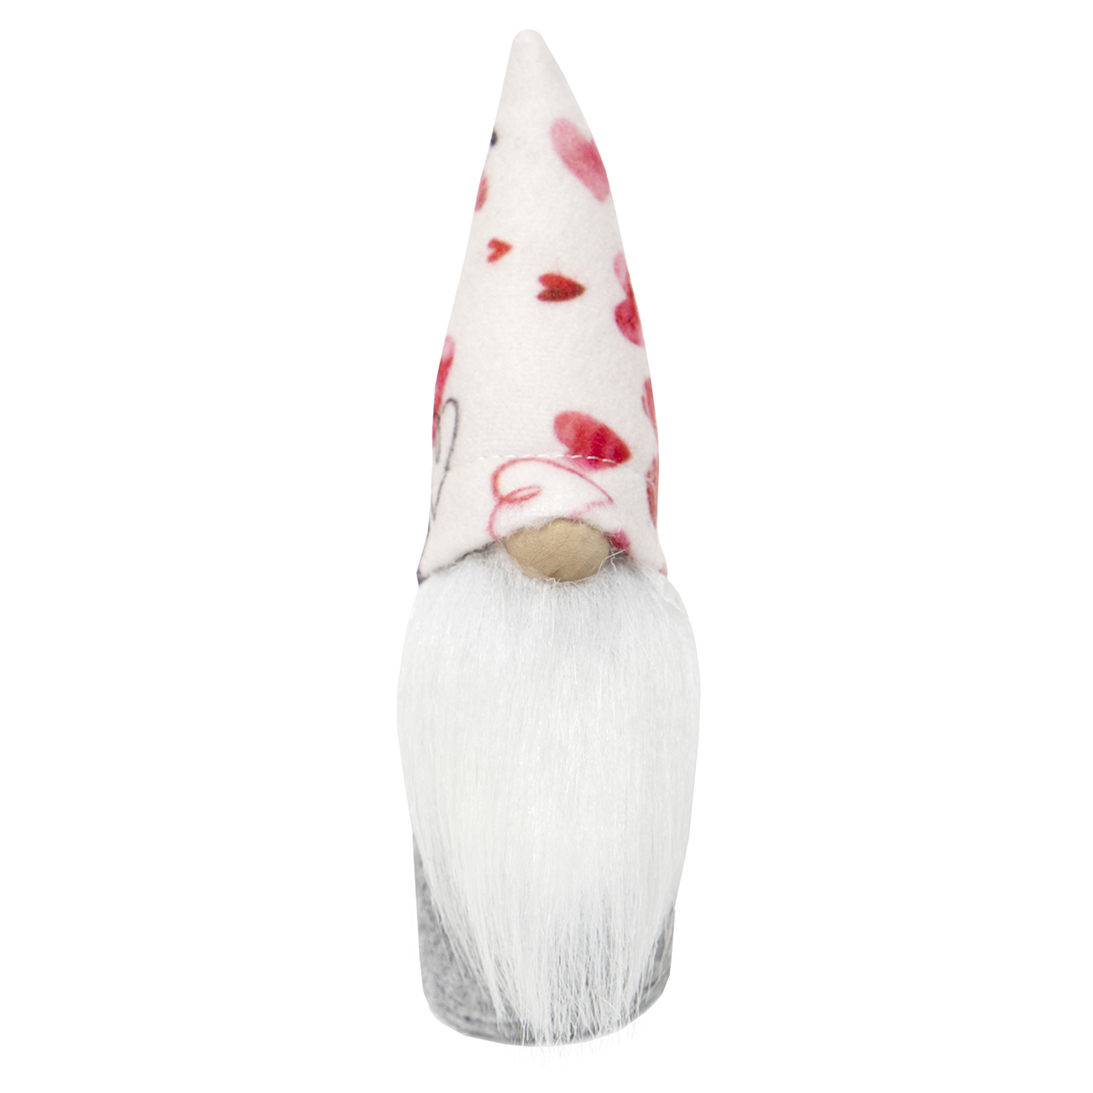 Sir Heartsalot Gnome with Wood Nose 6.5" Small